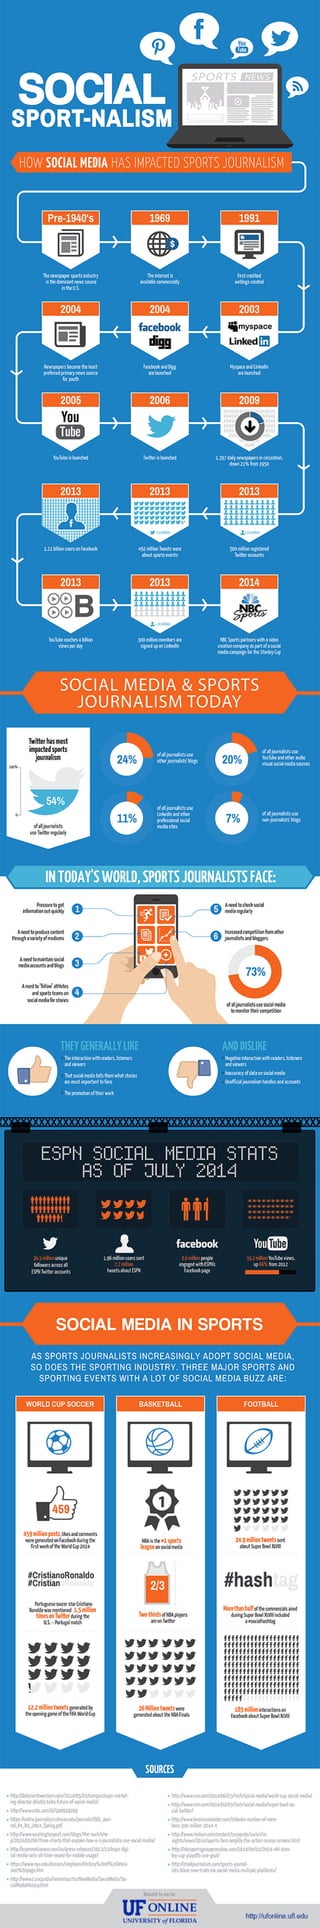 Social Media and Sports Journalism